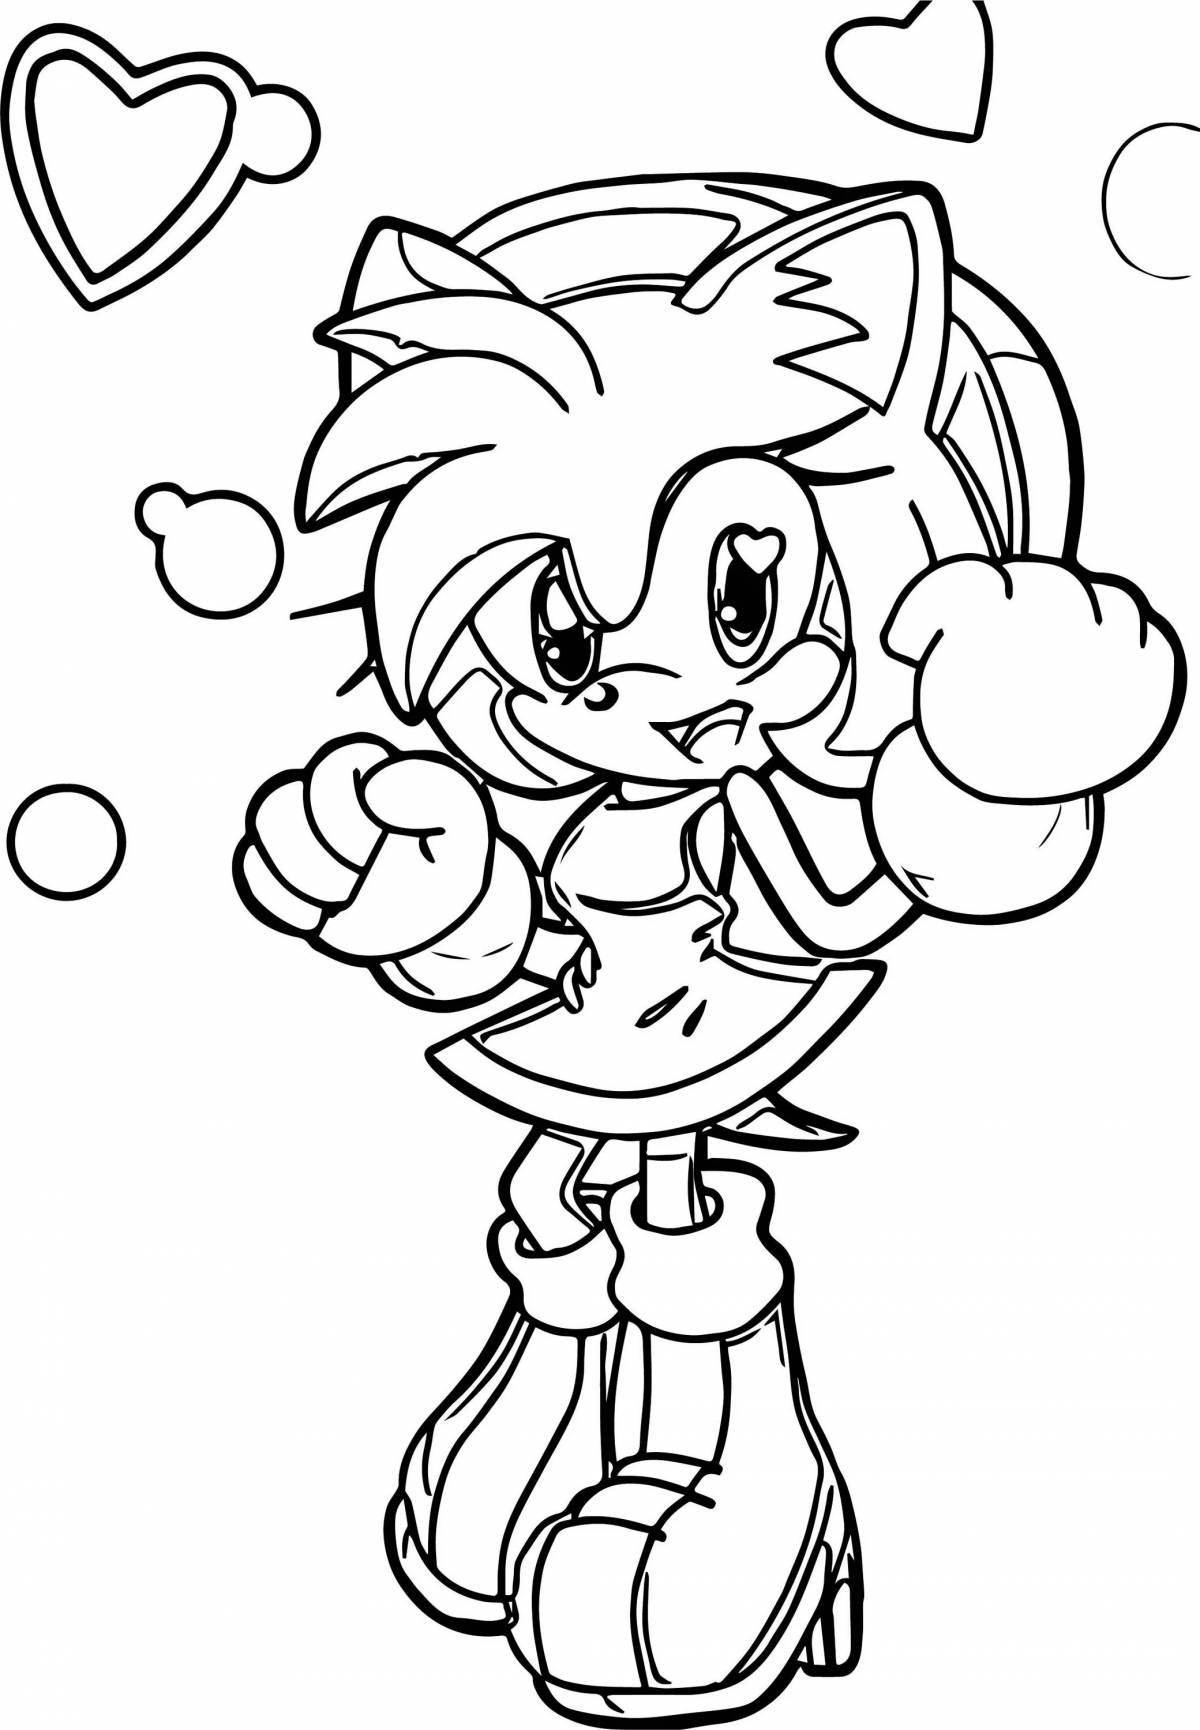 Rave sonic girl coloring book